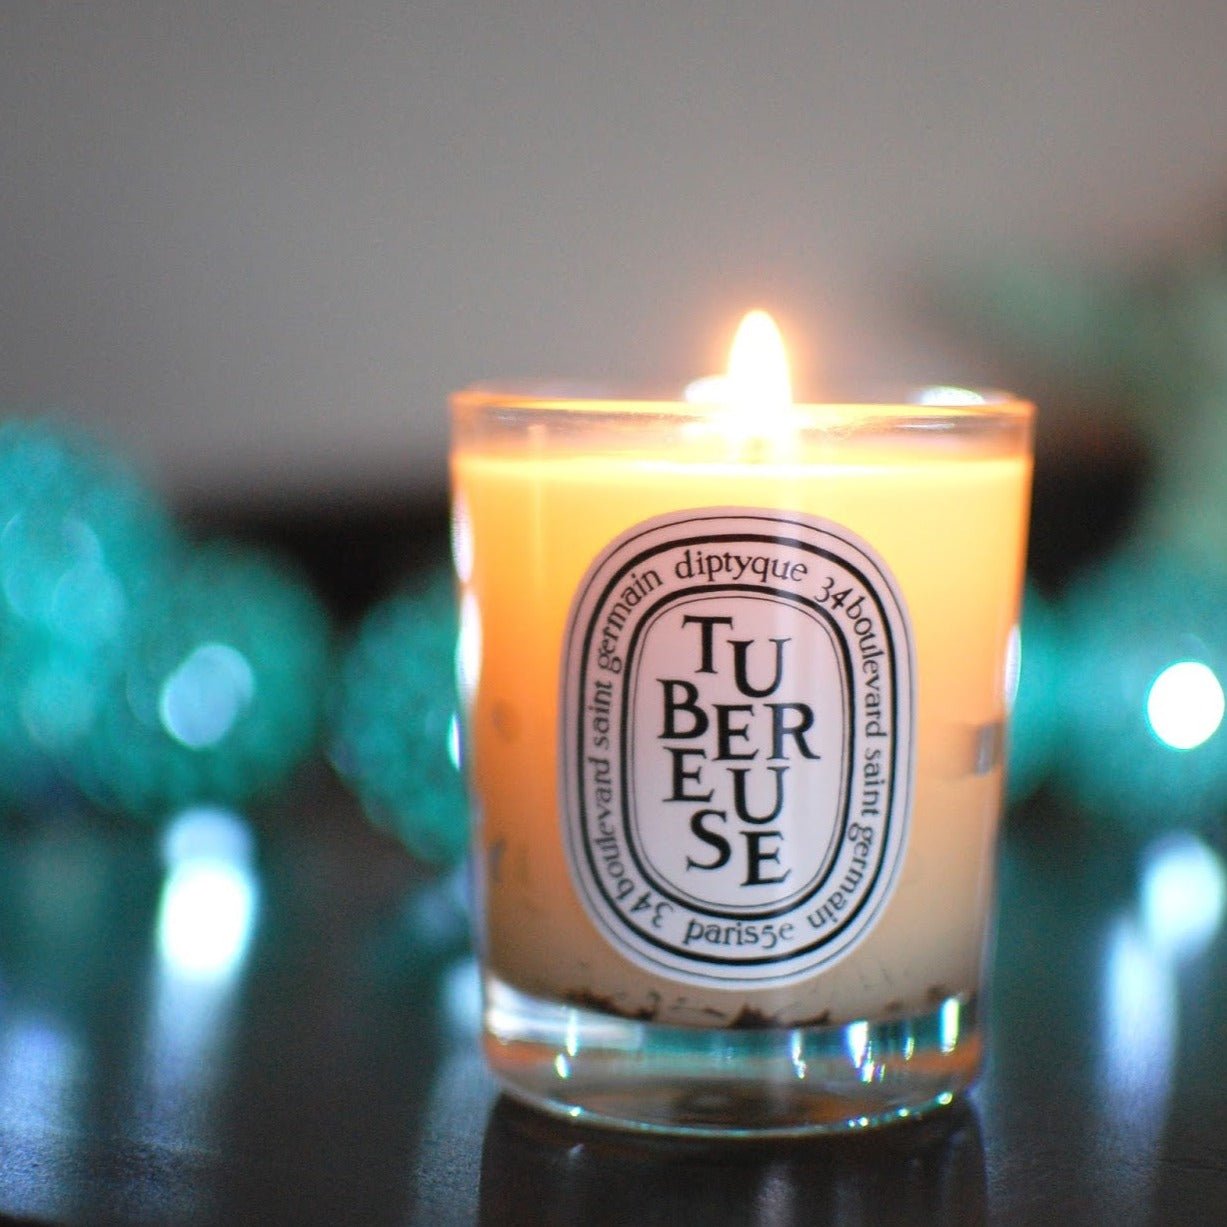 Diptyque Tubereuse Scented Candle | My Perfume Shop Australia